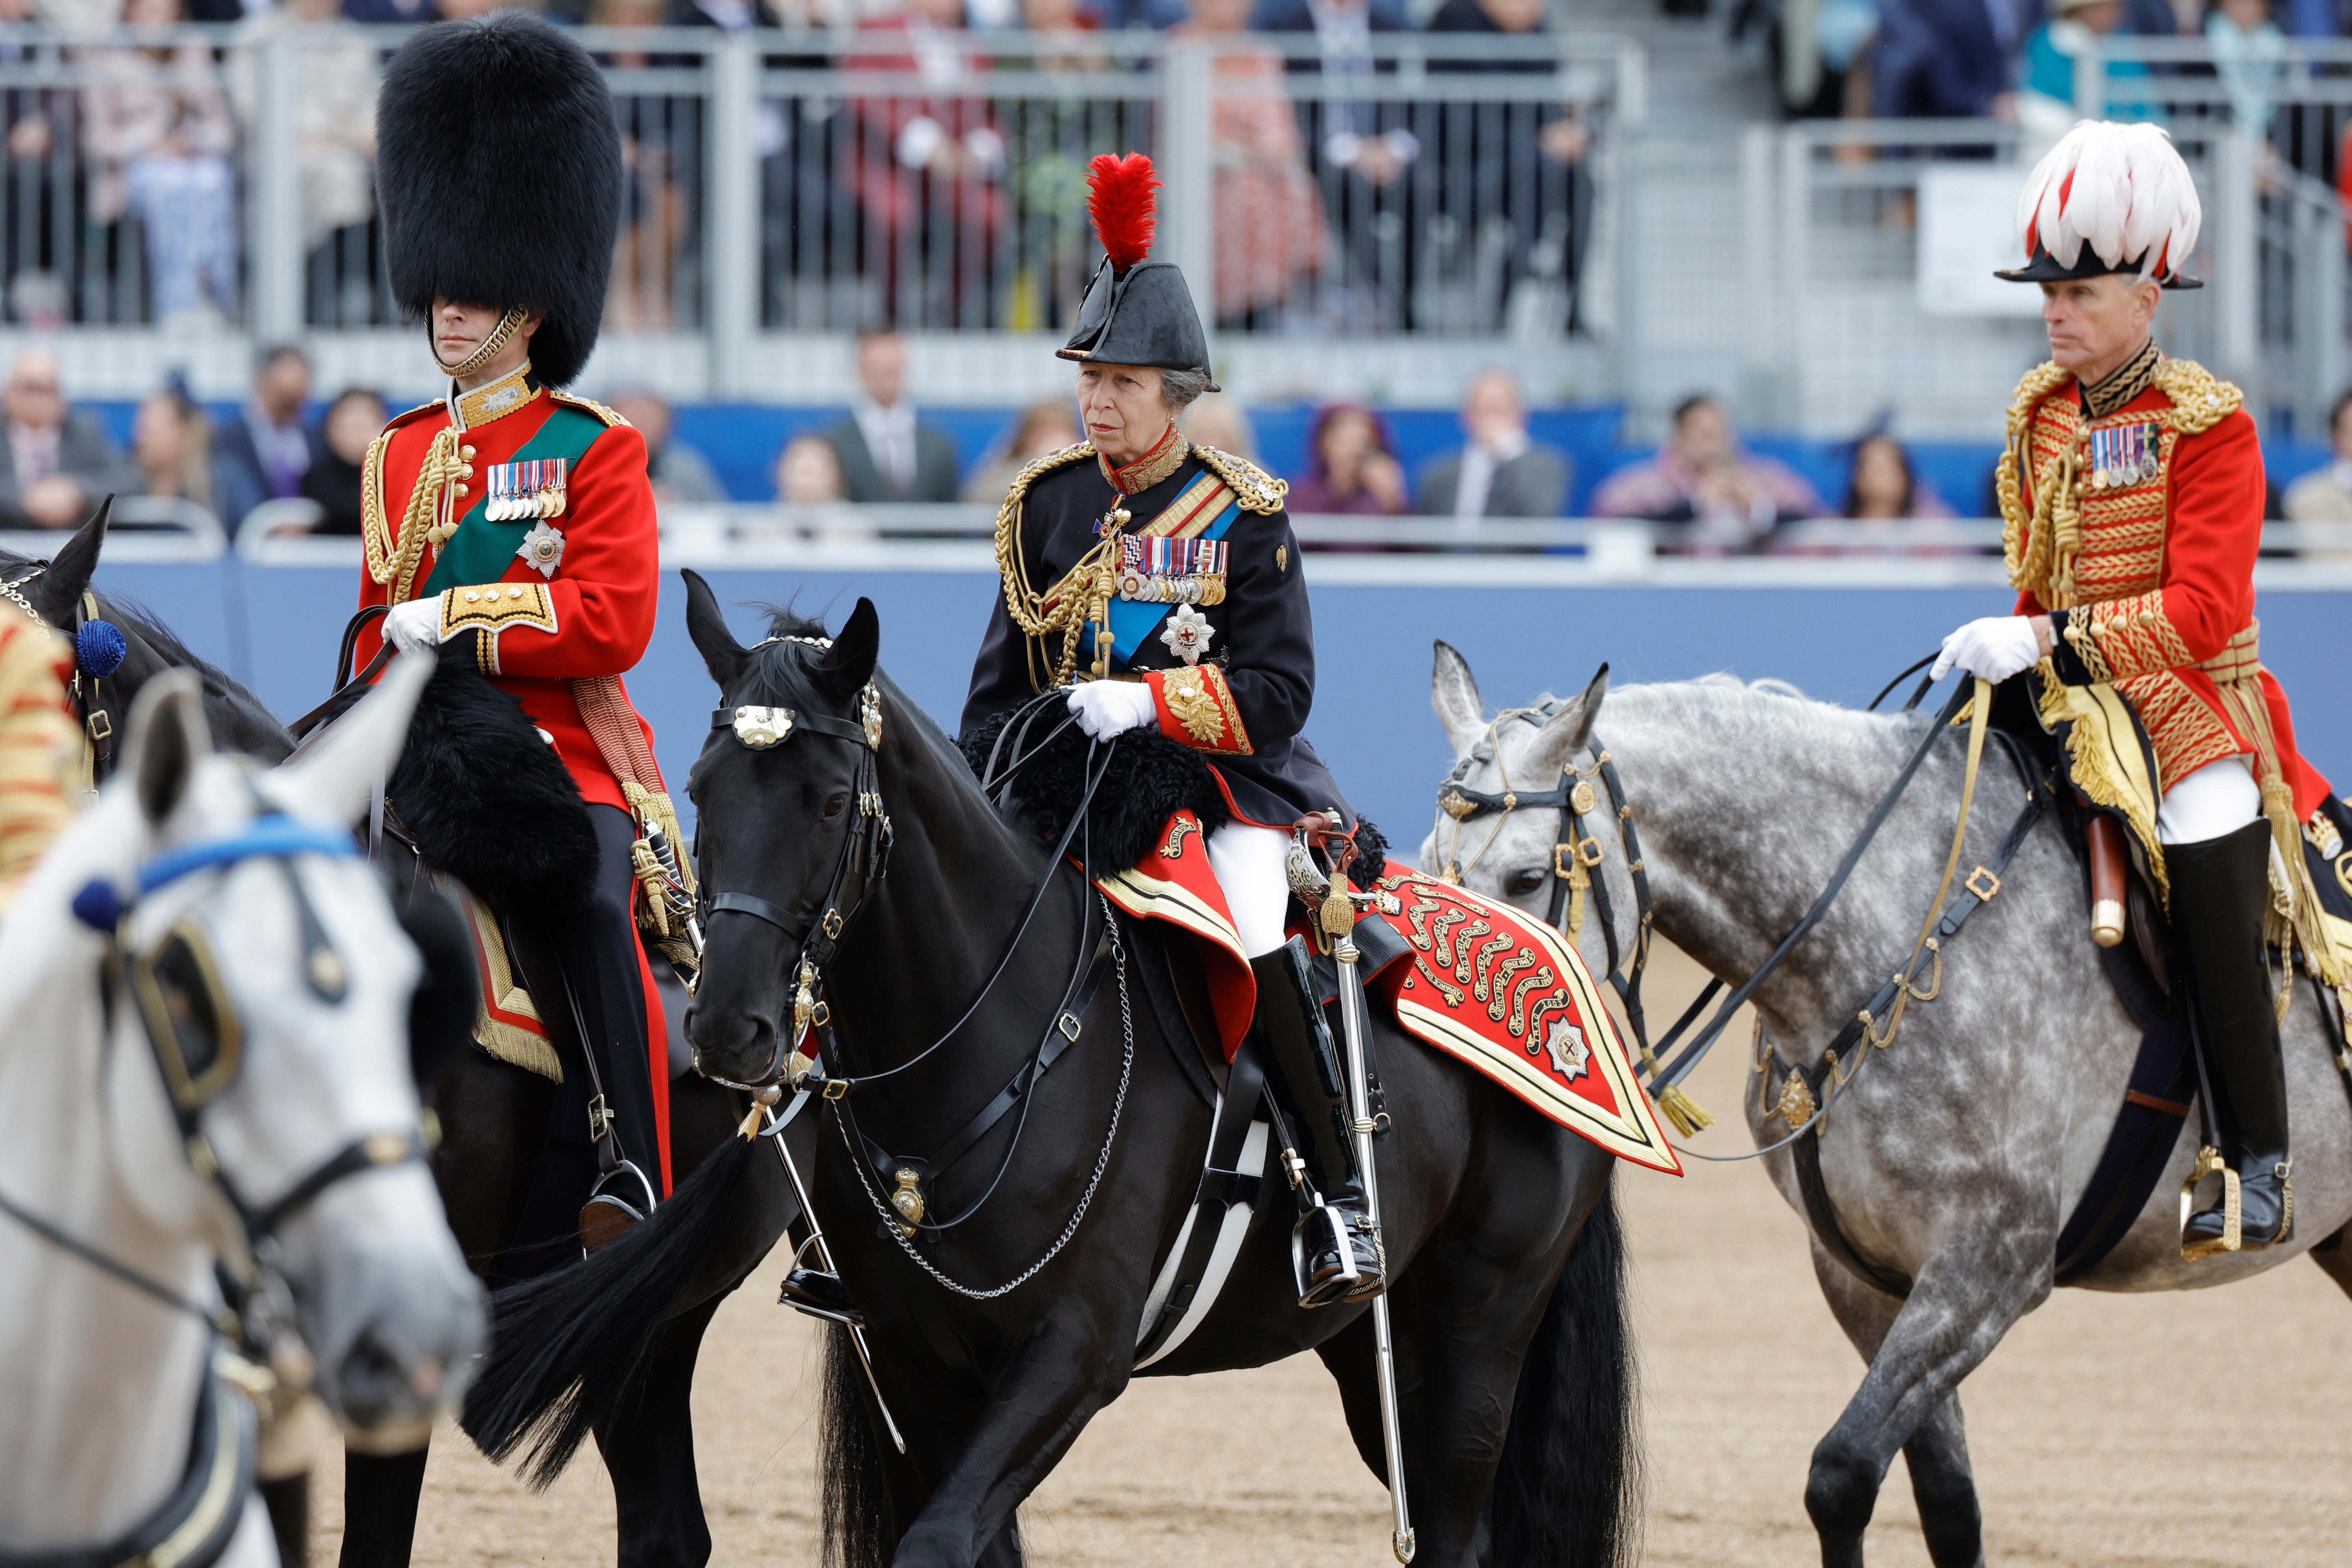 Princess Anne is being treated for a concussion and minor injuries after being kicked by a horse.